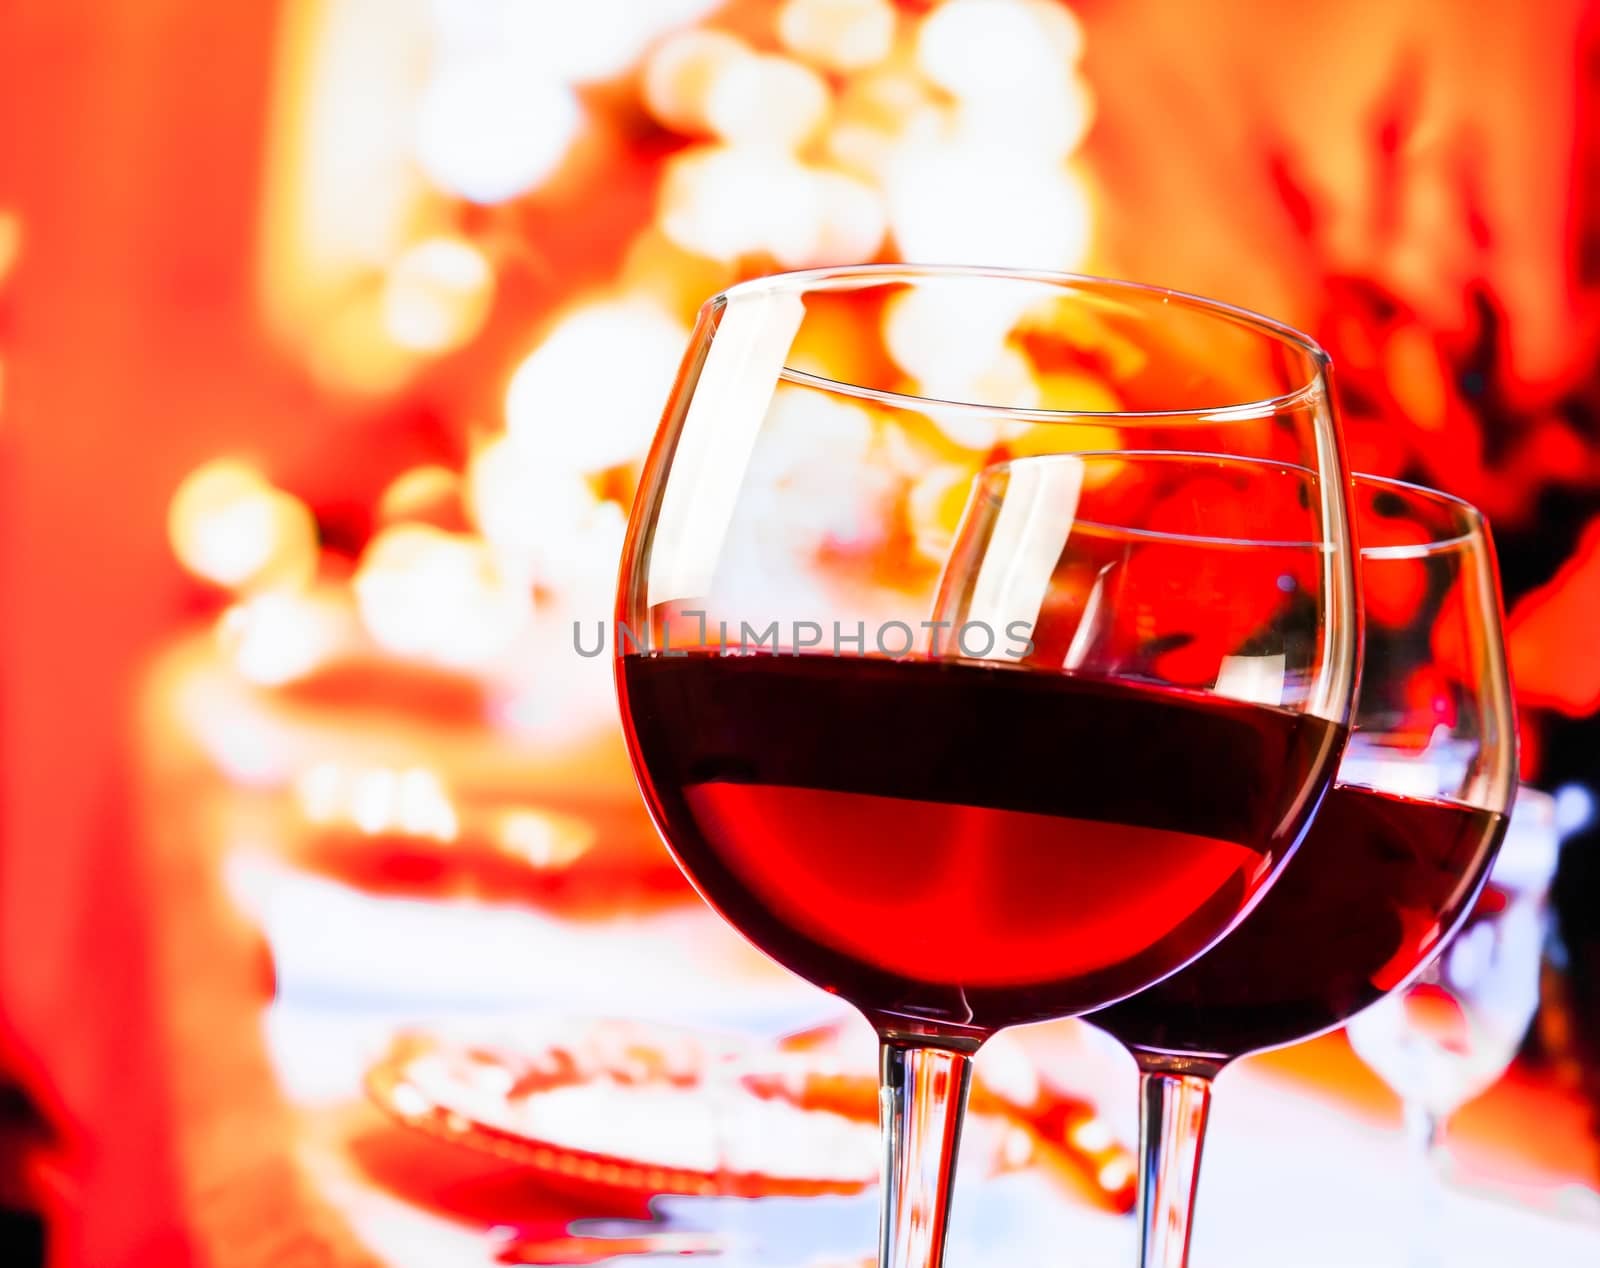 two red wine glasses against unfocused restaurant table background, festive and fun concept